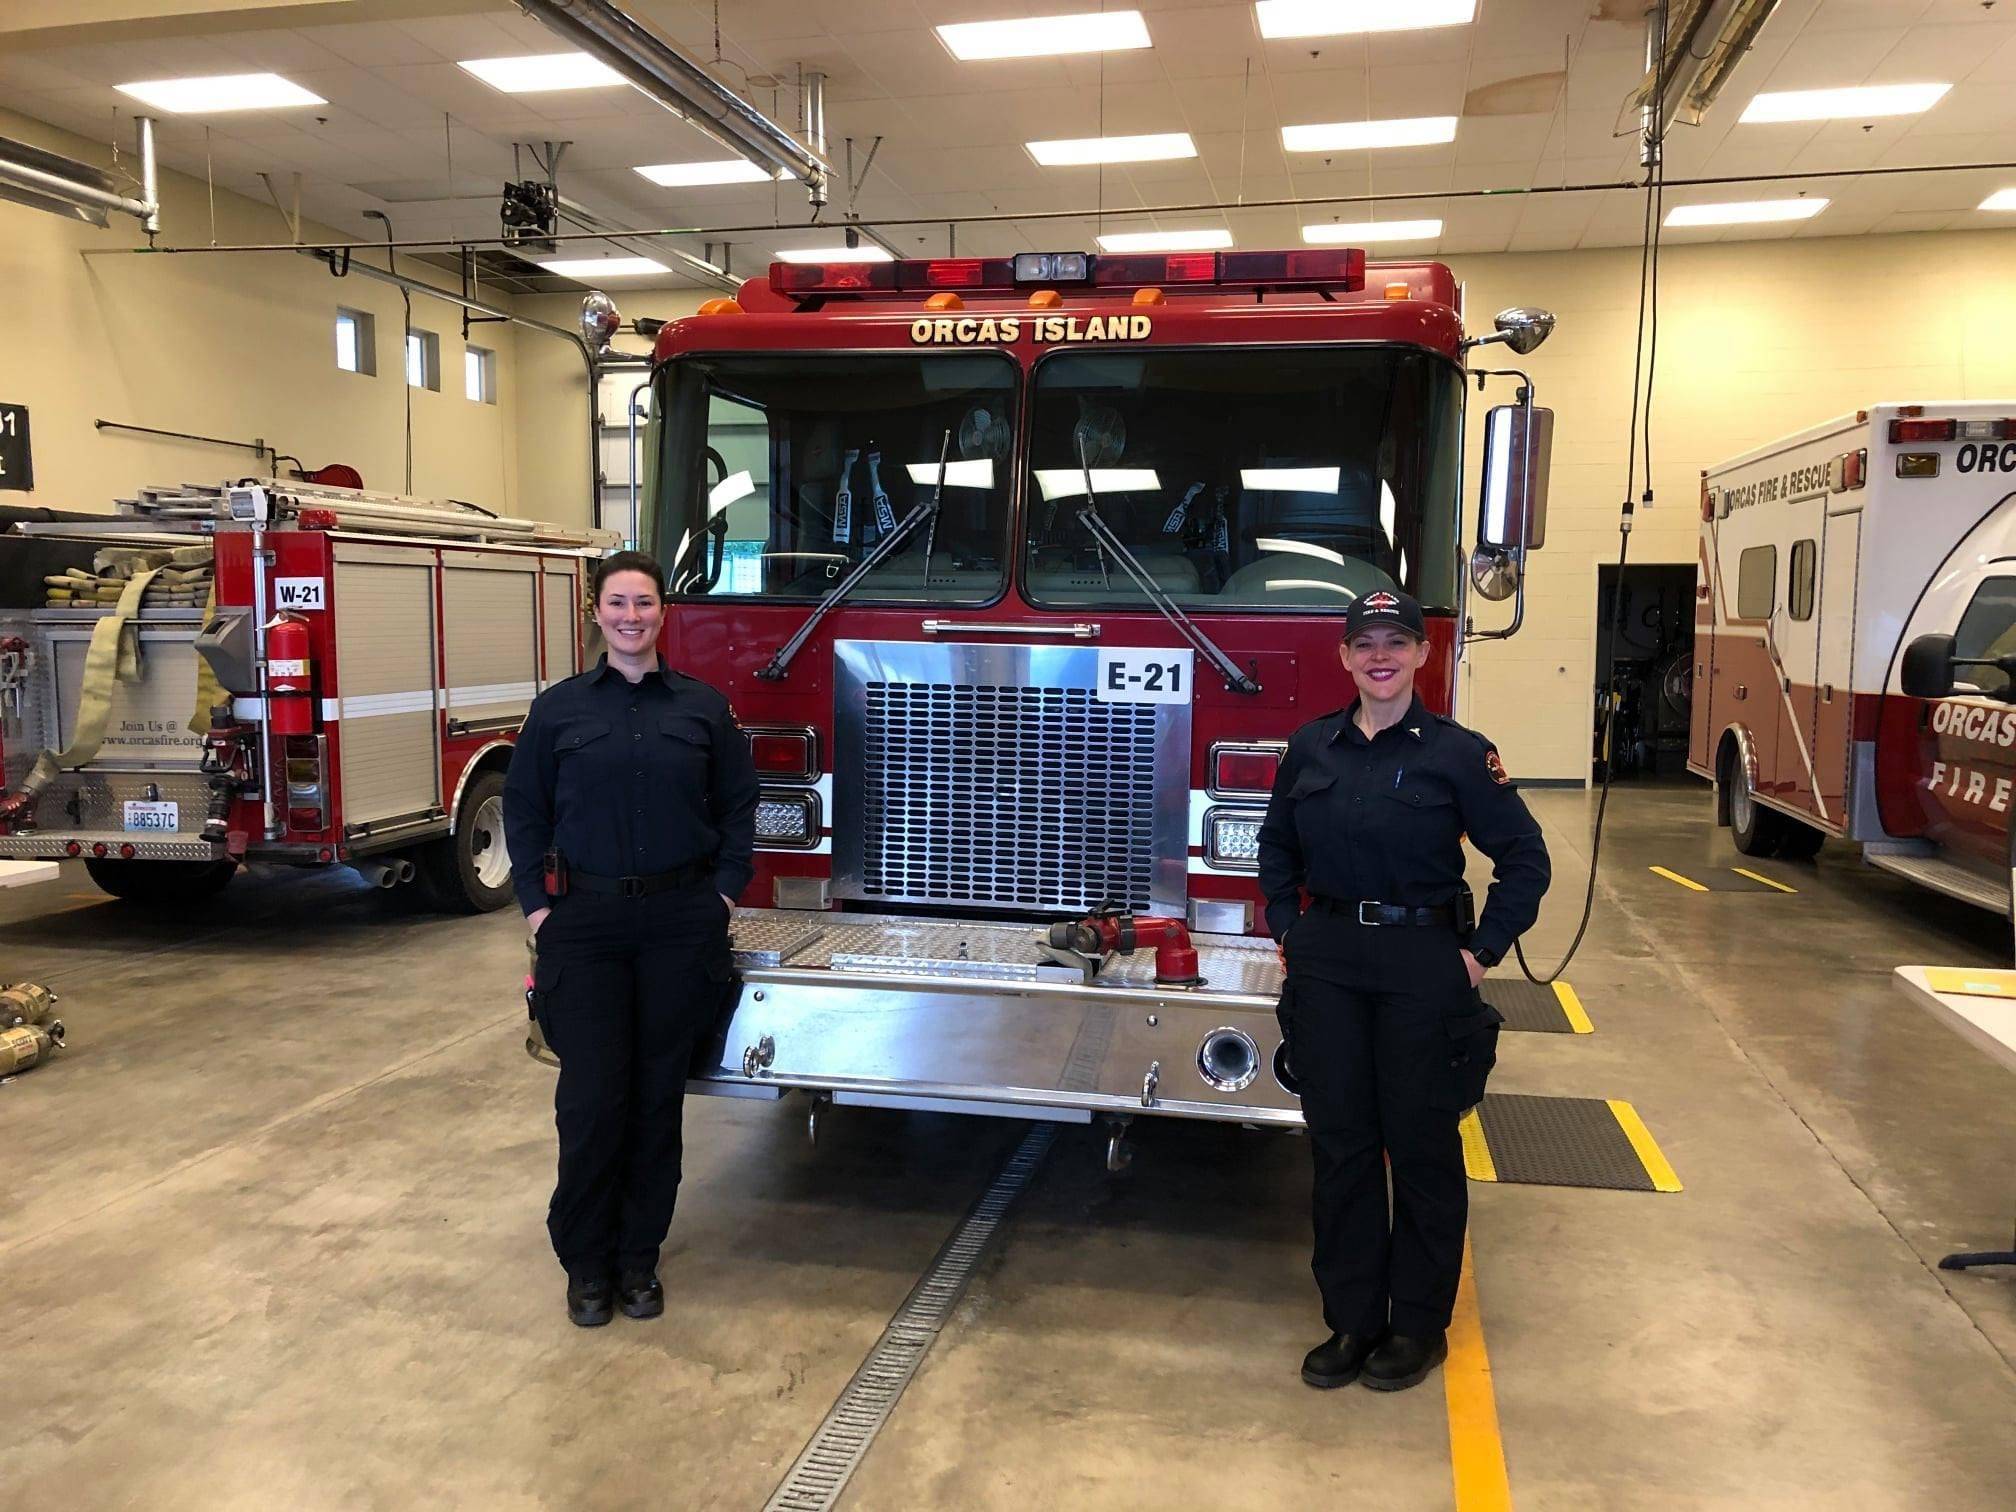 Contributed photo
Right: The Orcas Island Fire and Rescue family recently welcomed two new hires, Lieutenant LaRen Gevaart-Rossie and Captain Kasey Jo Weigley.